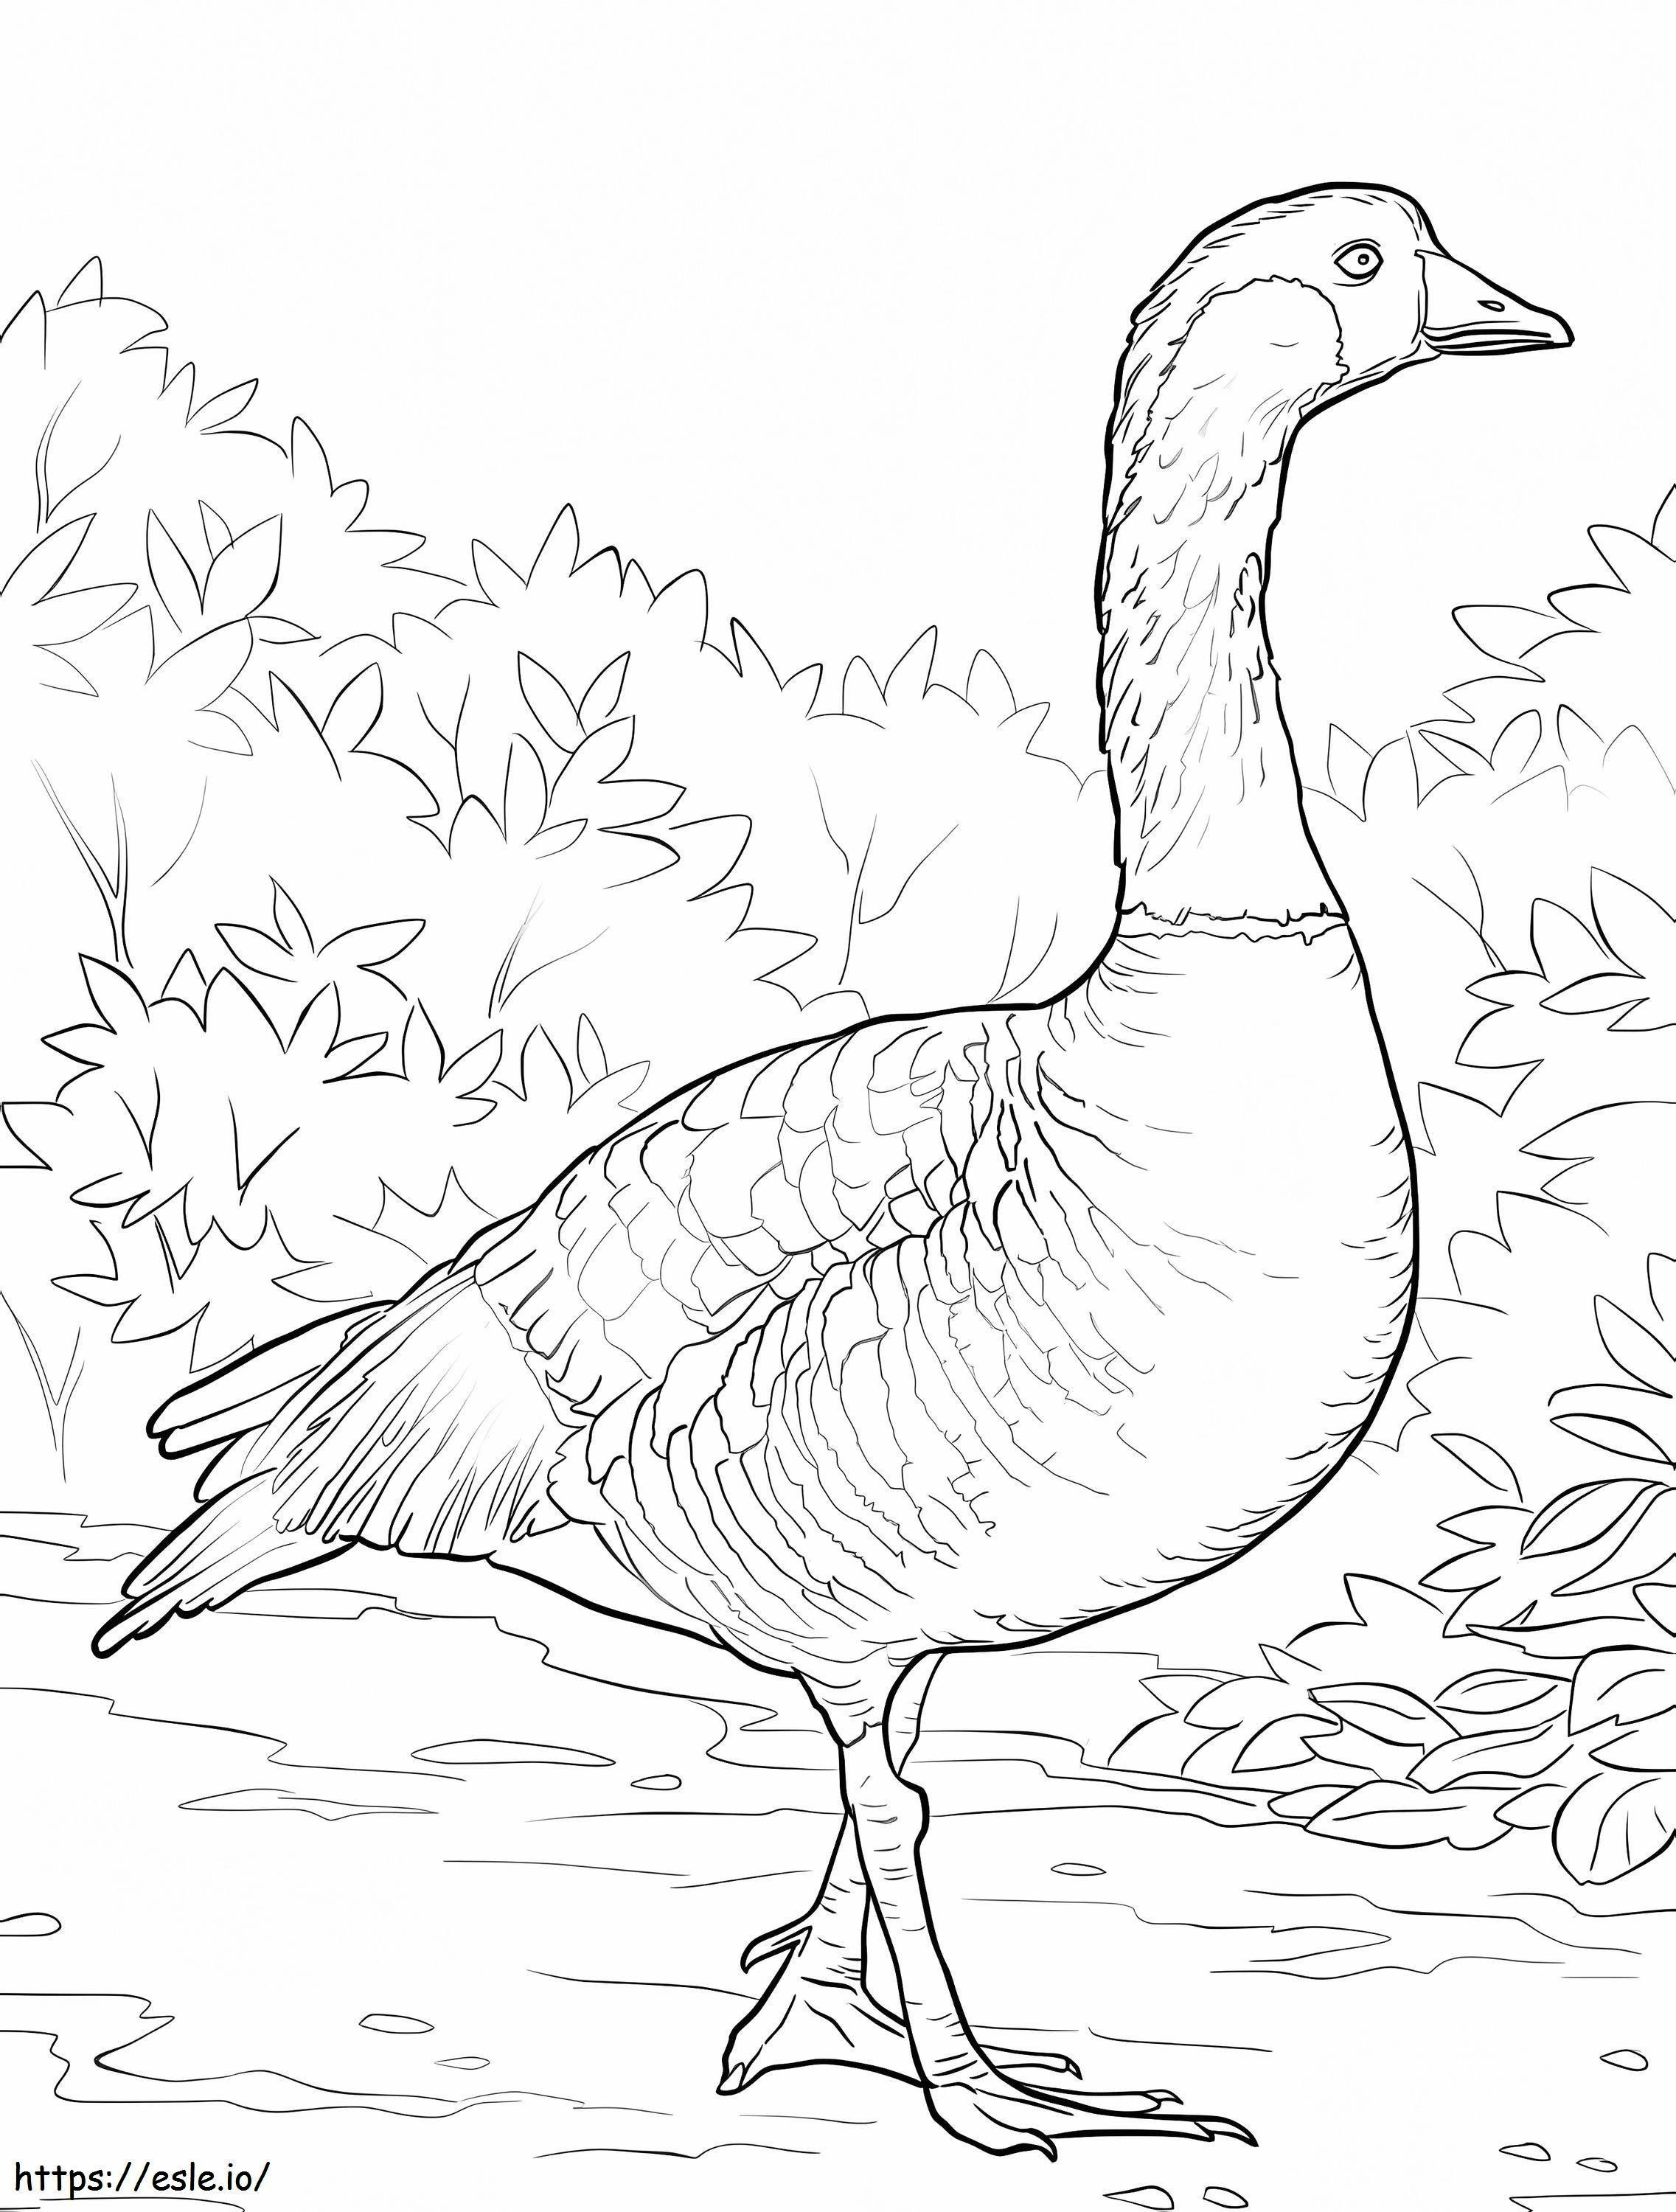 Nene coloring page